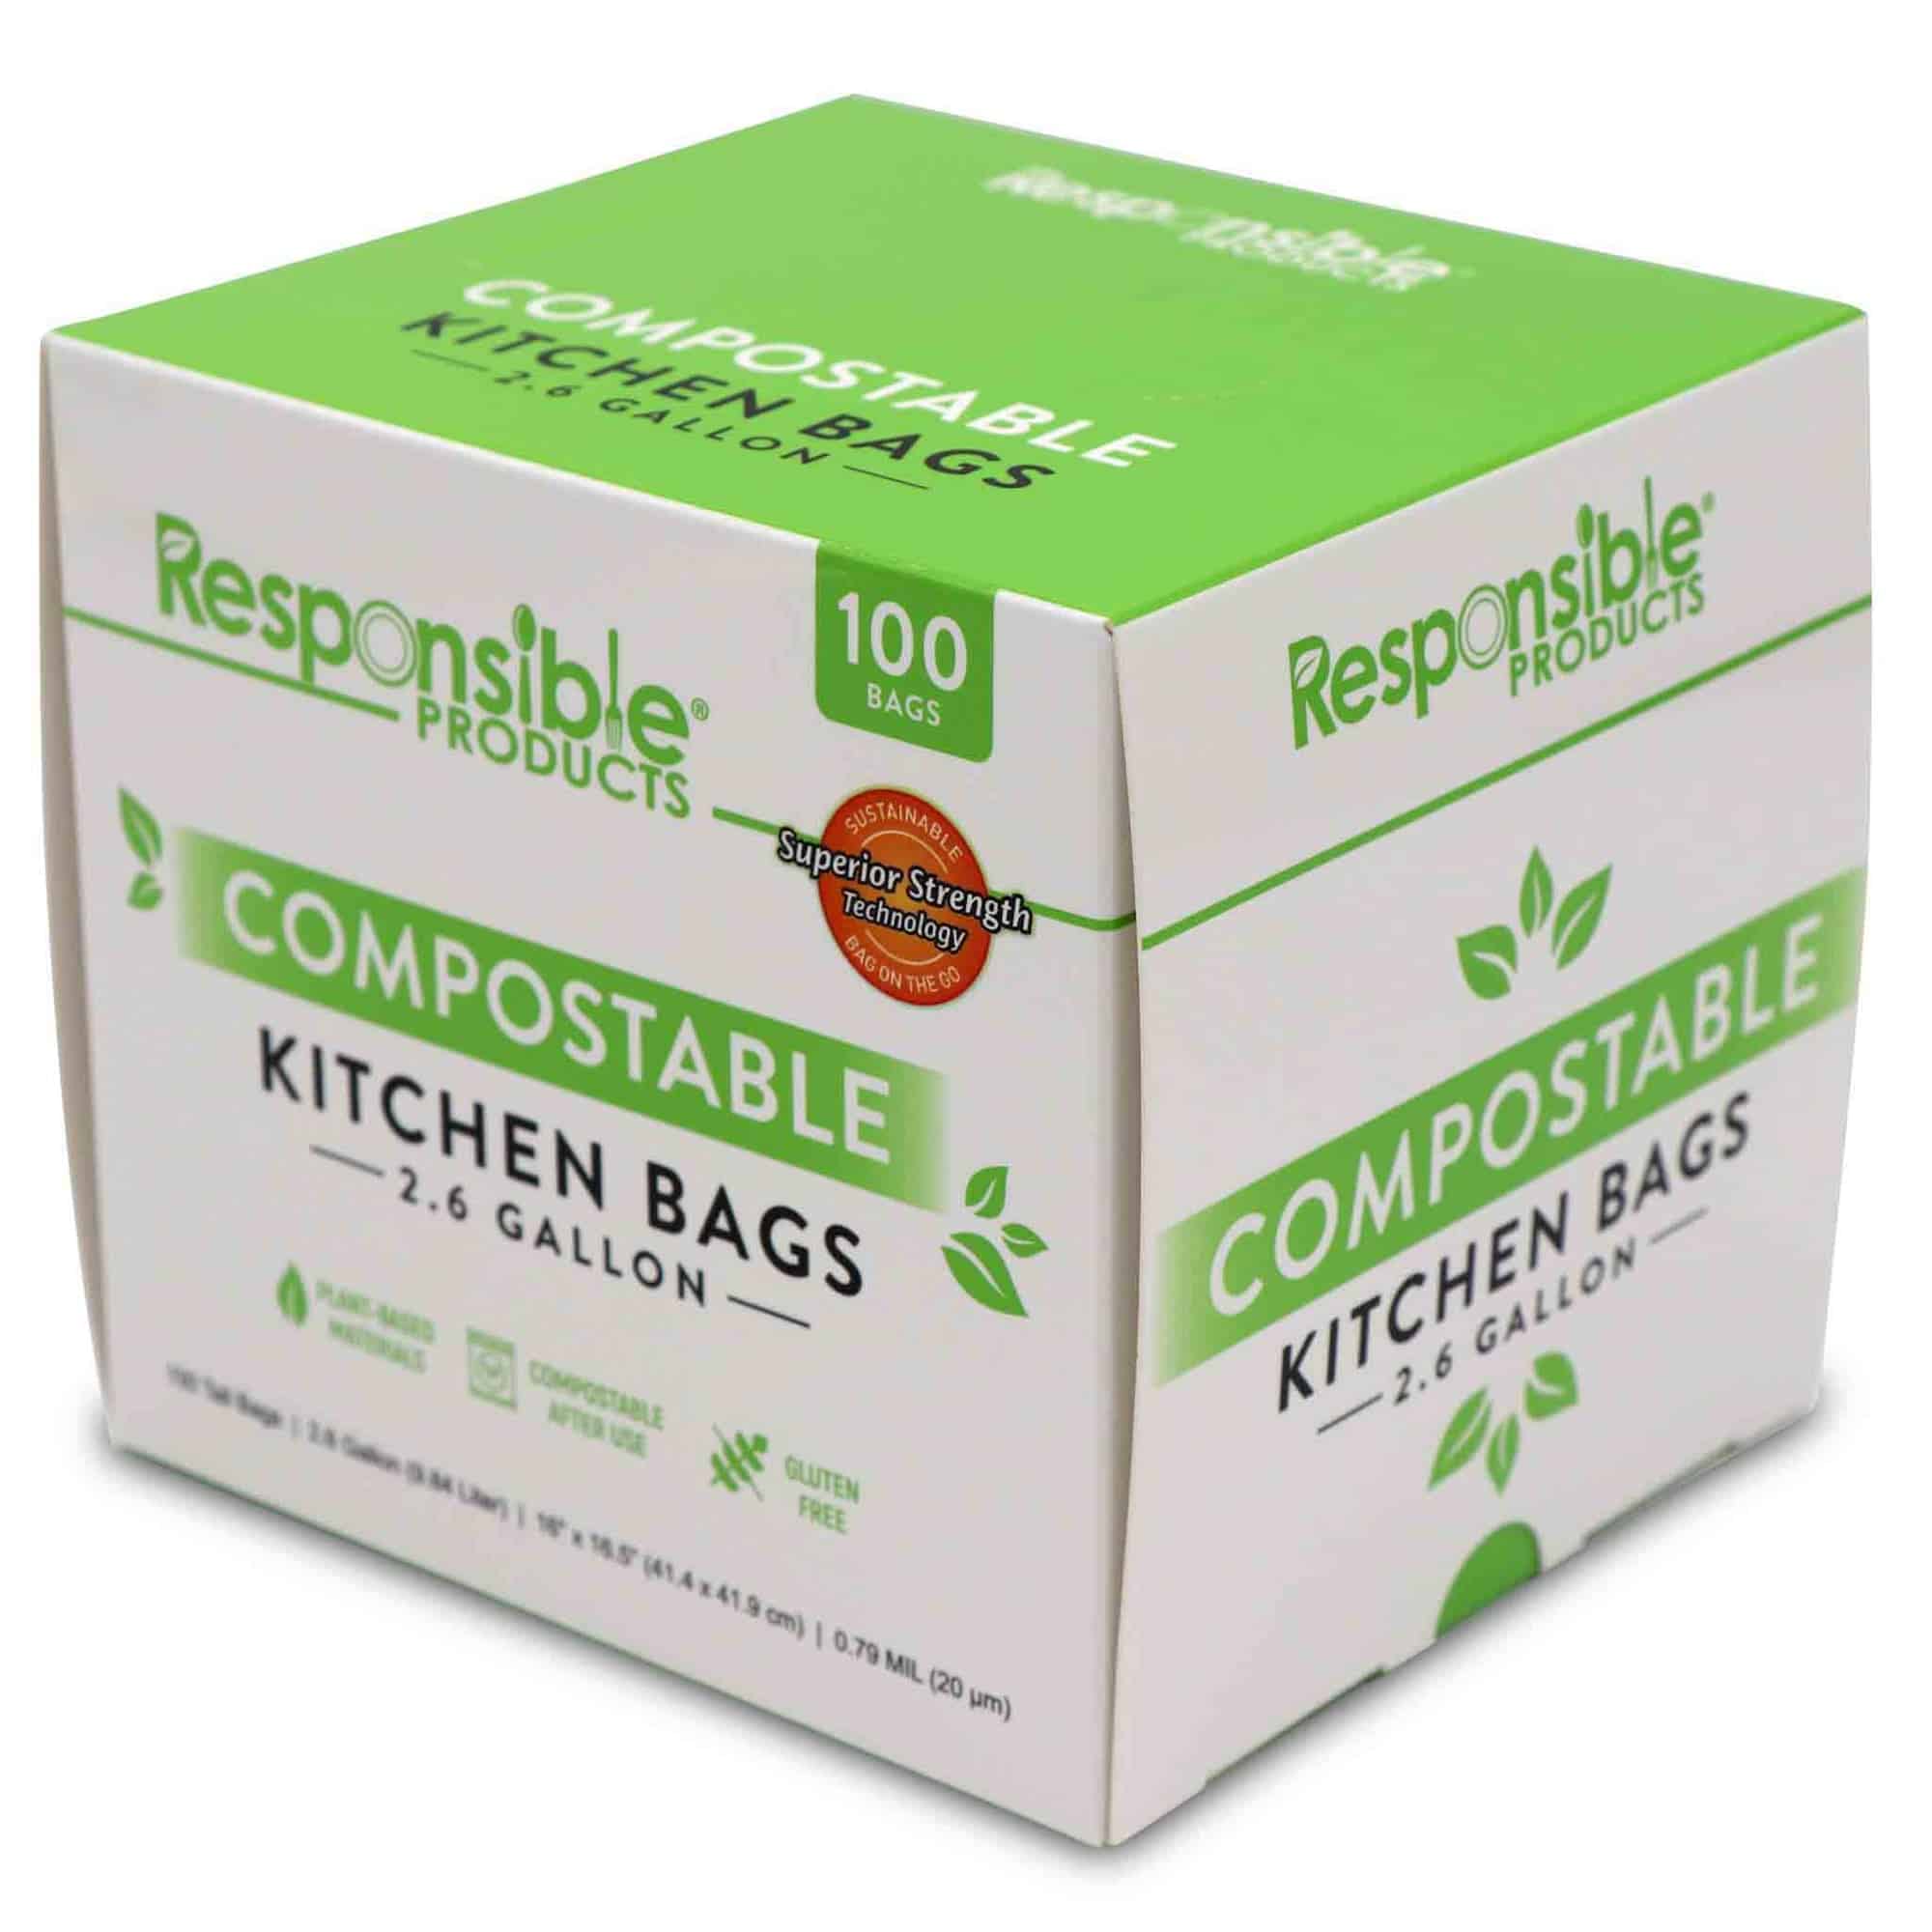 Compostable Cling Wrap - B & H Packaging Ltd